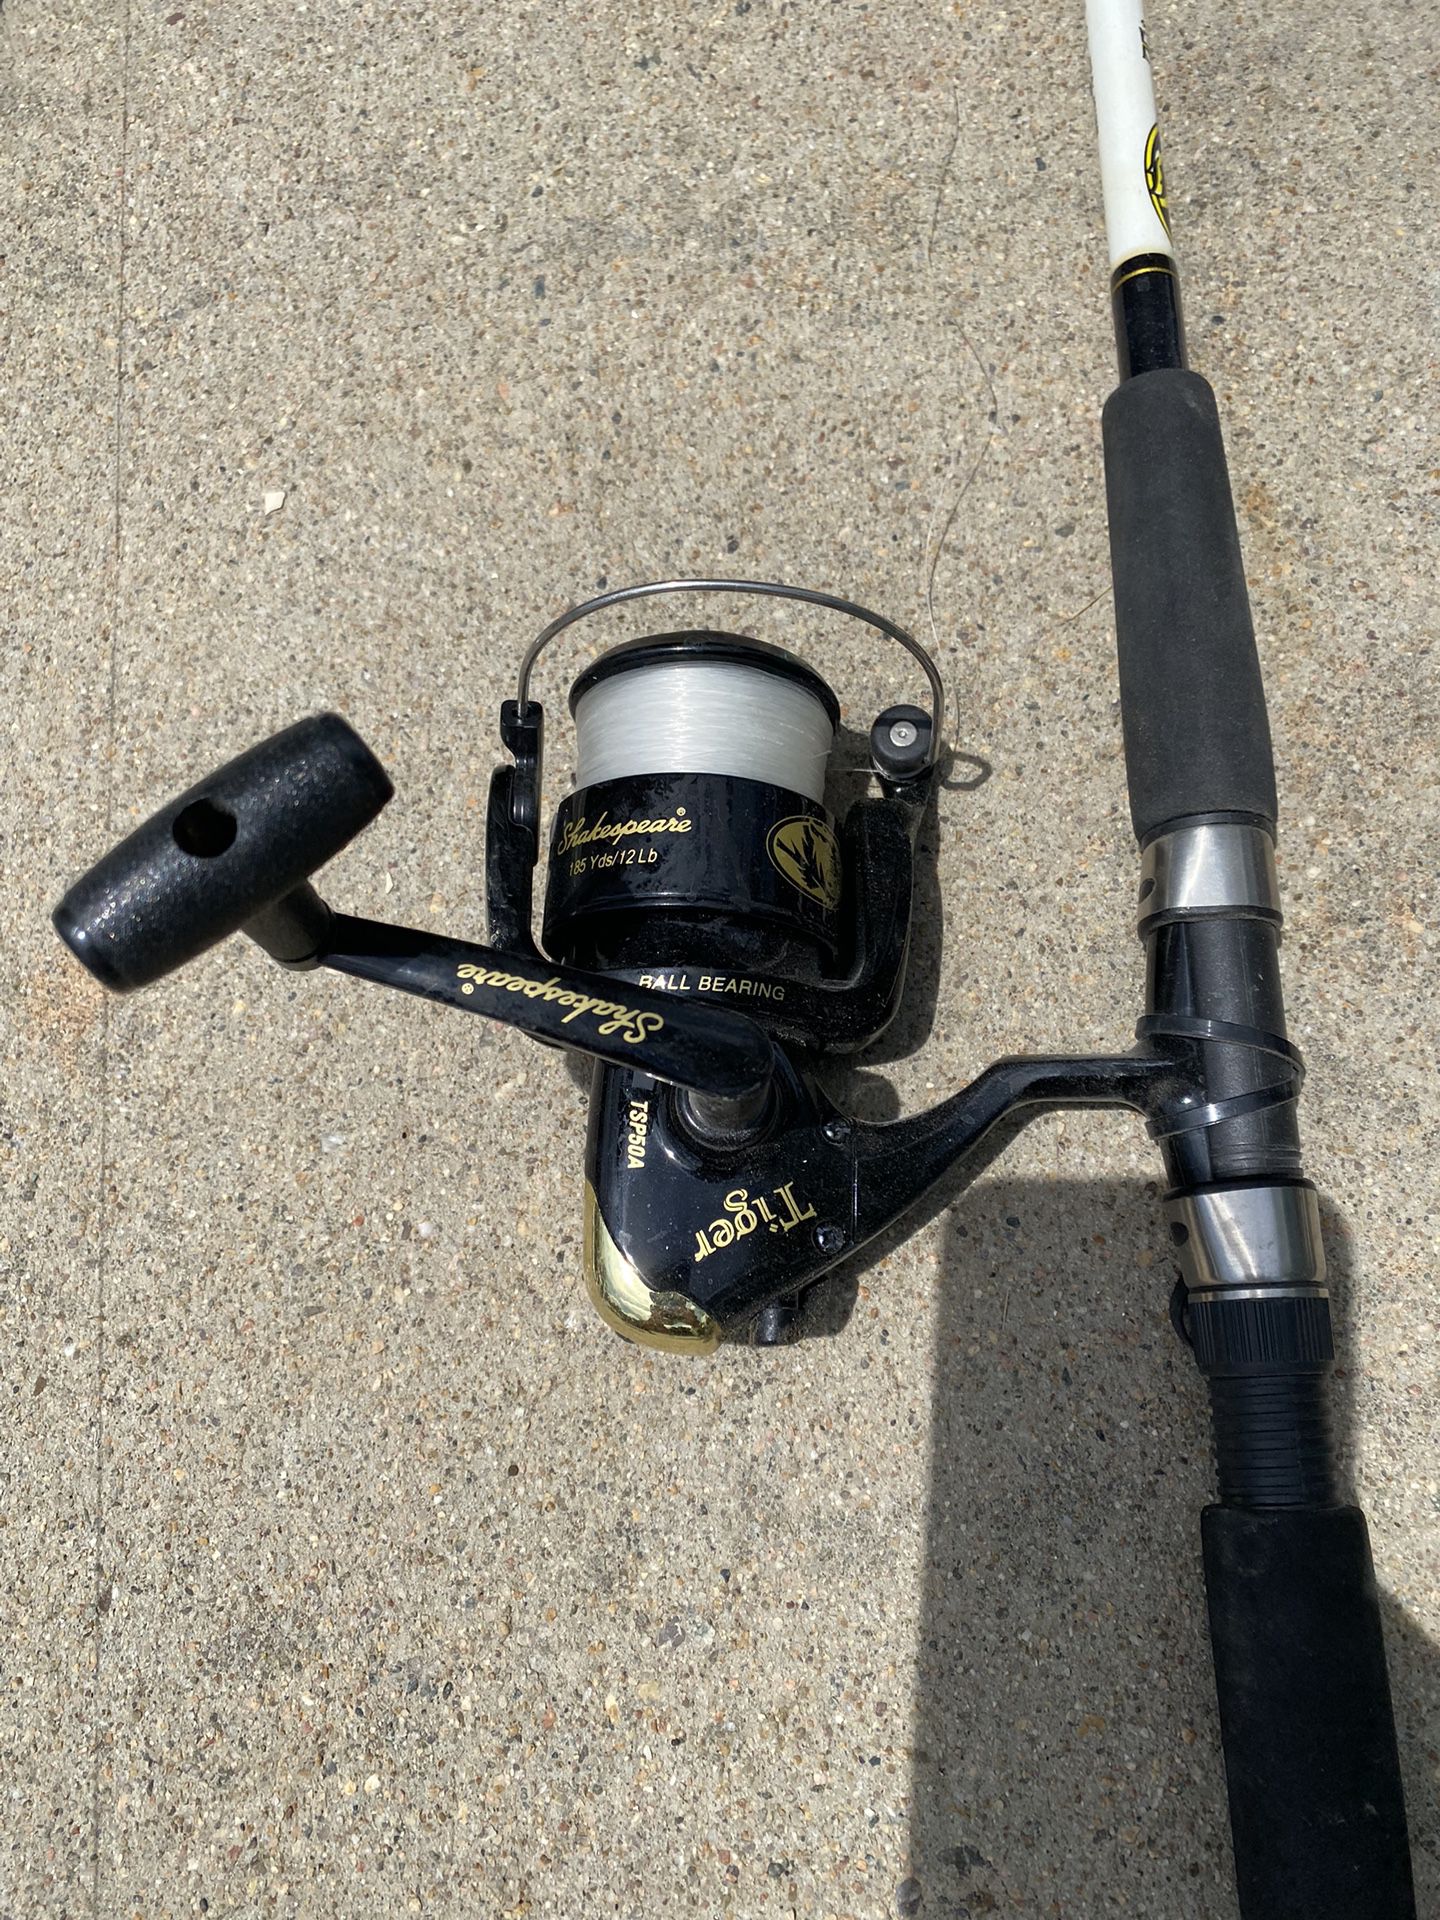 Ocean/Lake Fishing Rods And Reels for Sale in Lafayette, CO - OfferUp